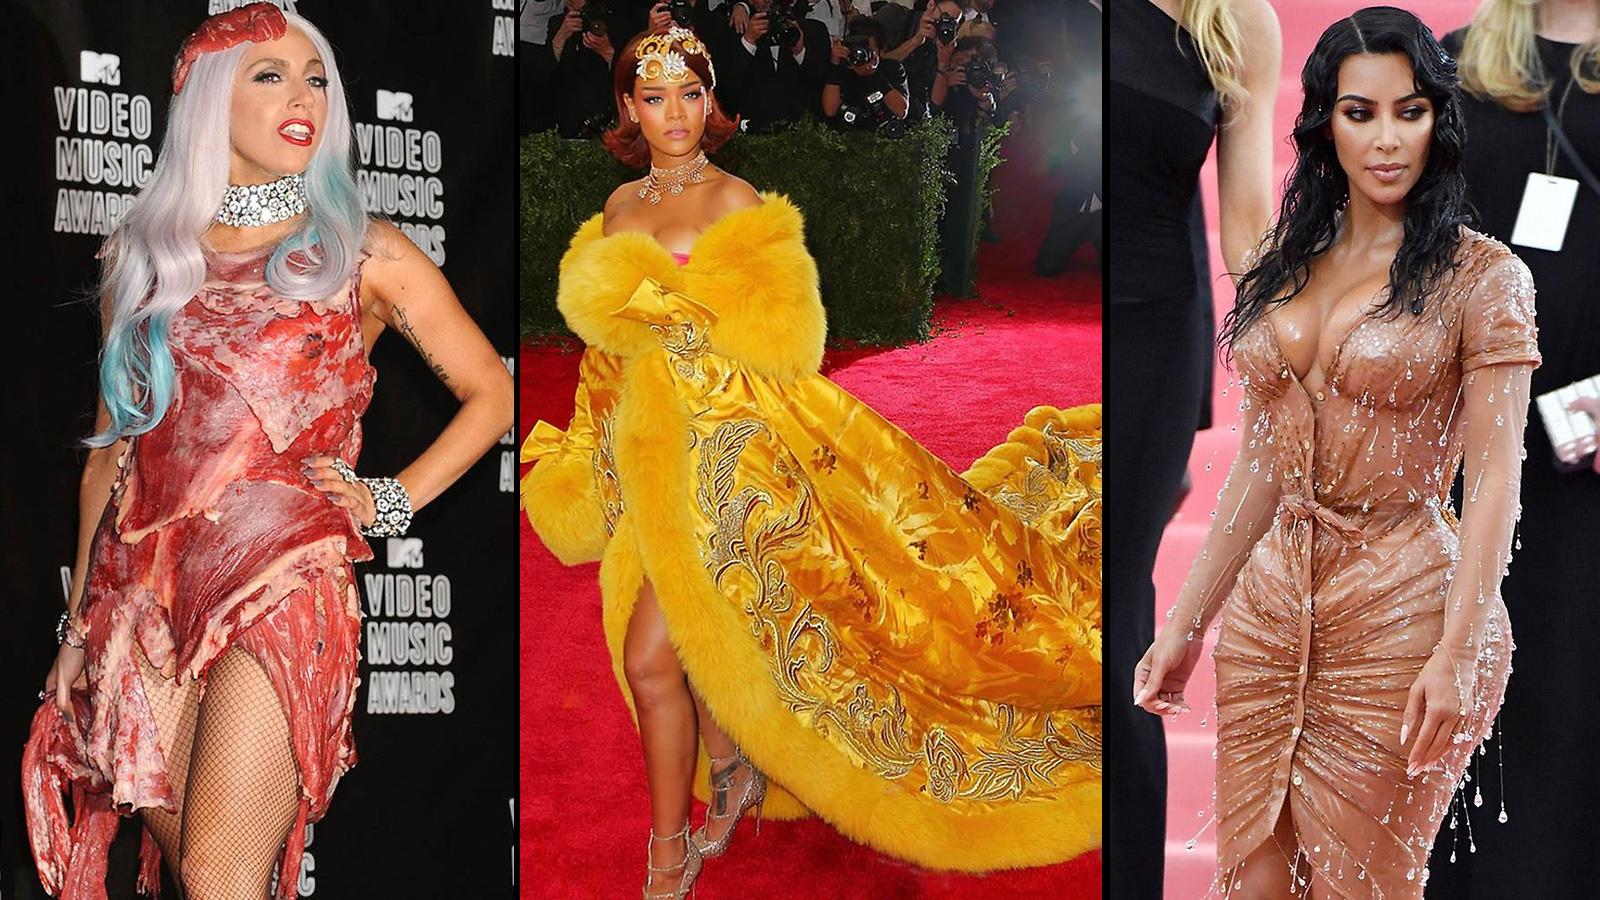 The 41 Most Memorable Red Carpet Looks From the Past Decade